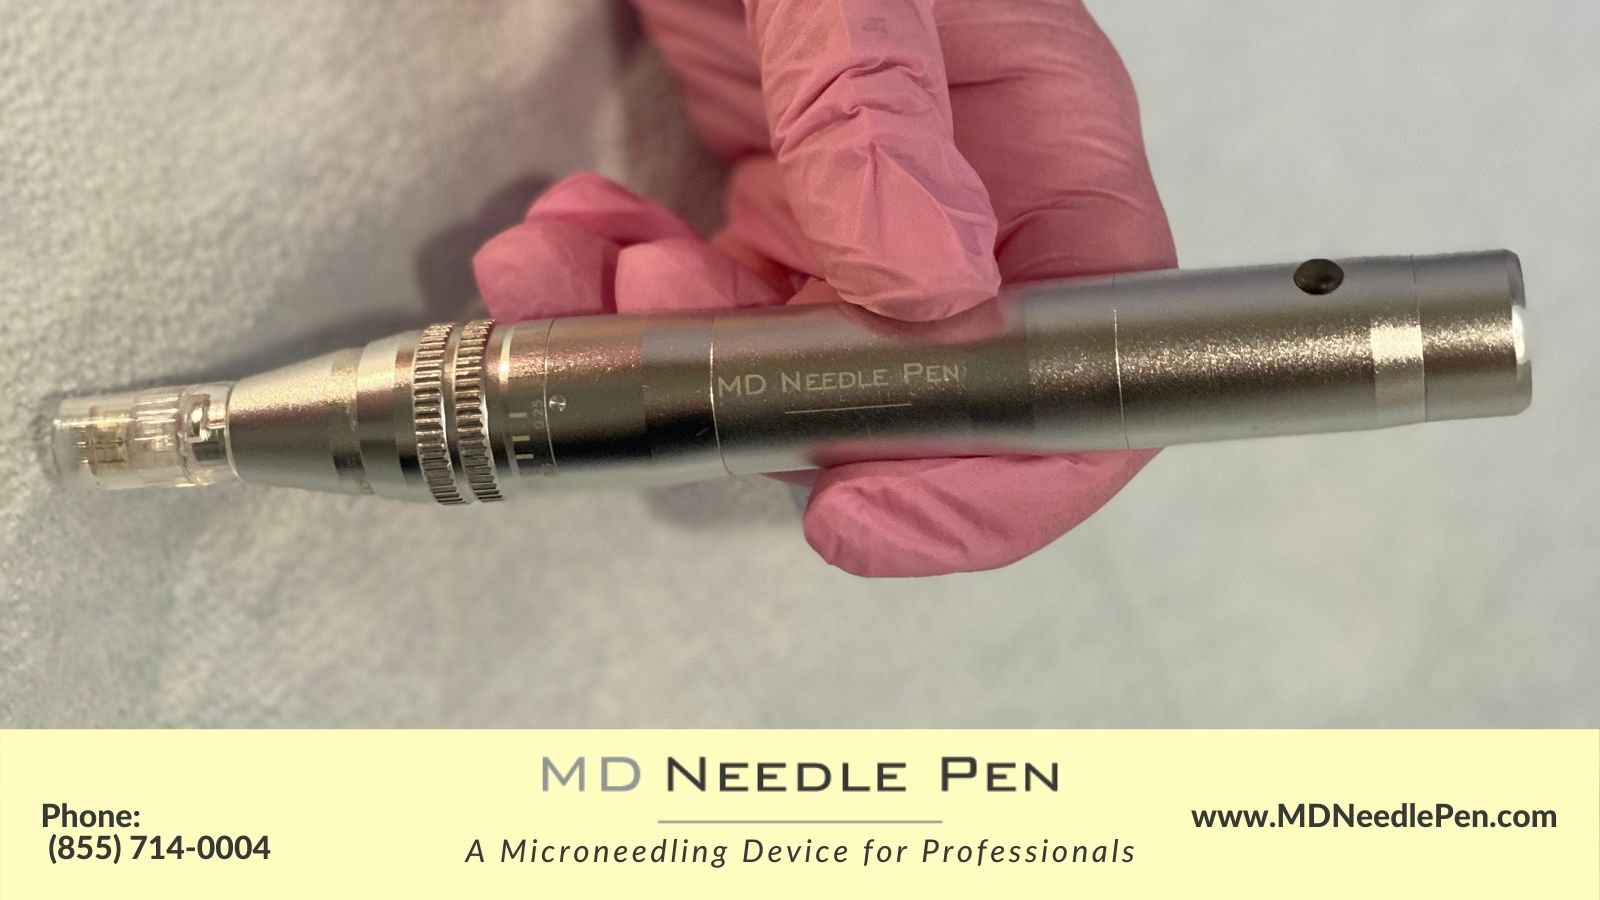 What is the Best Professional Microneedling Device?